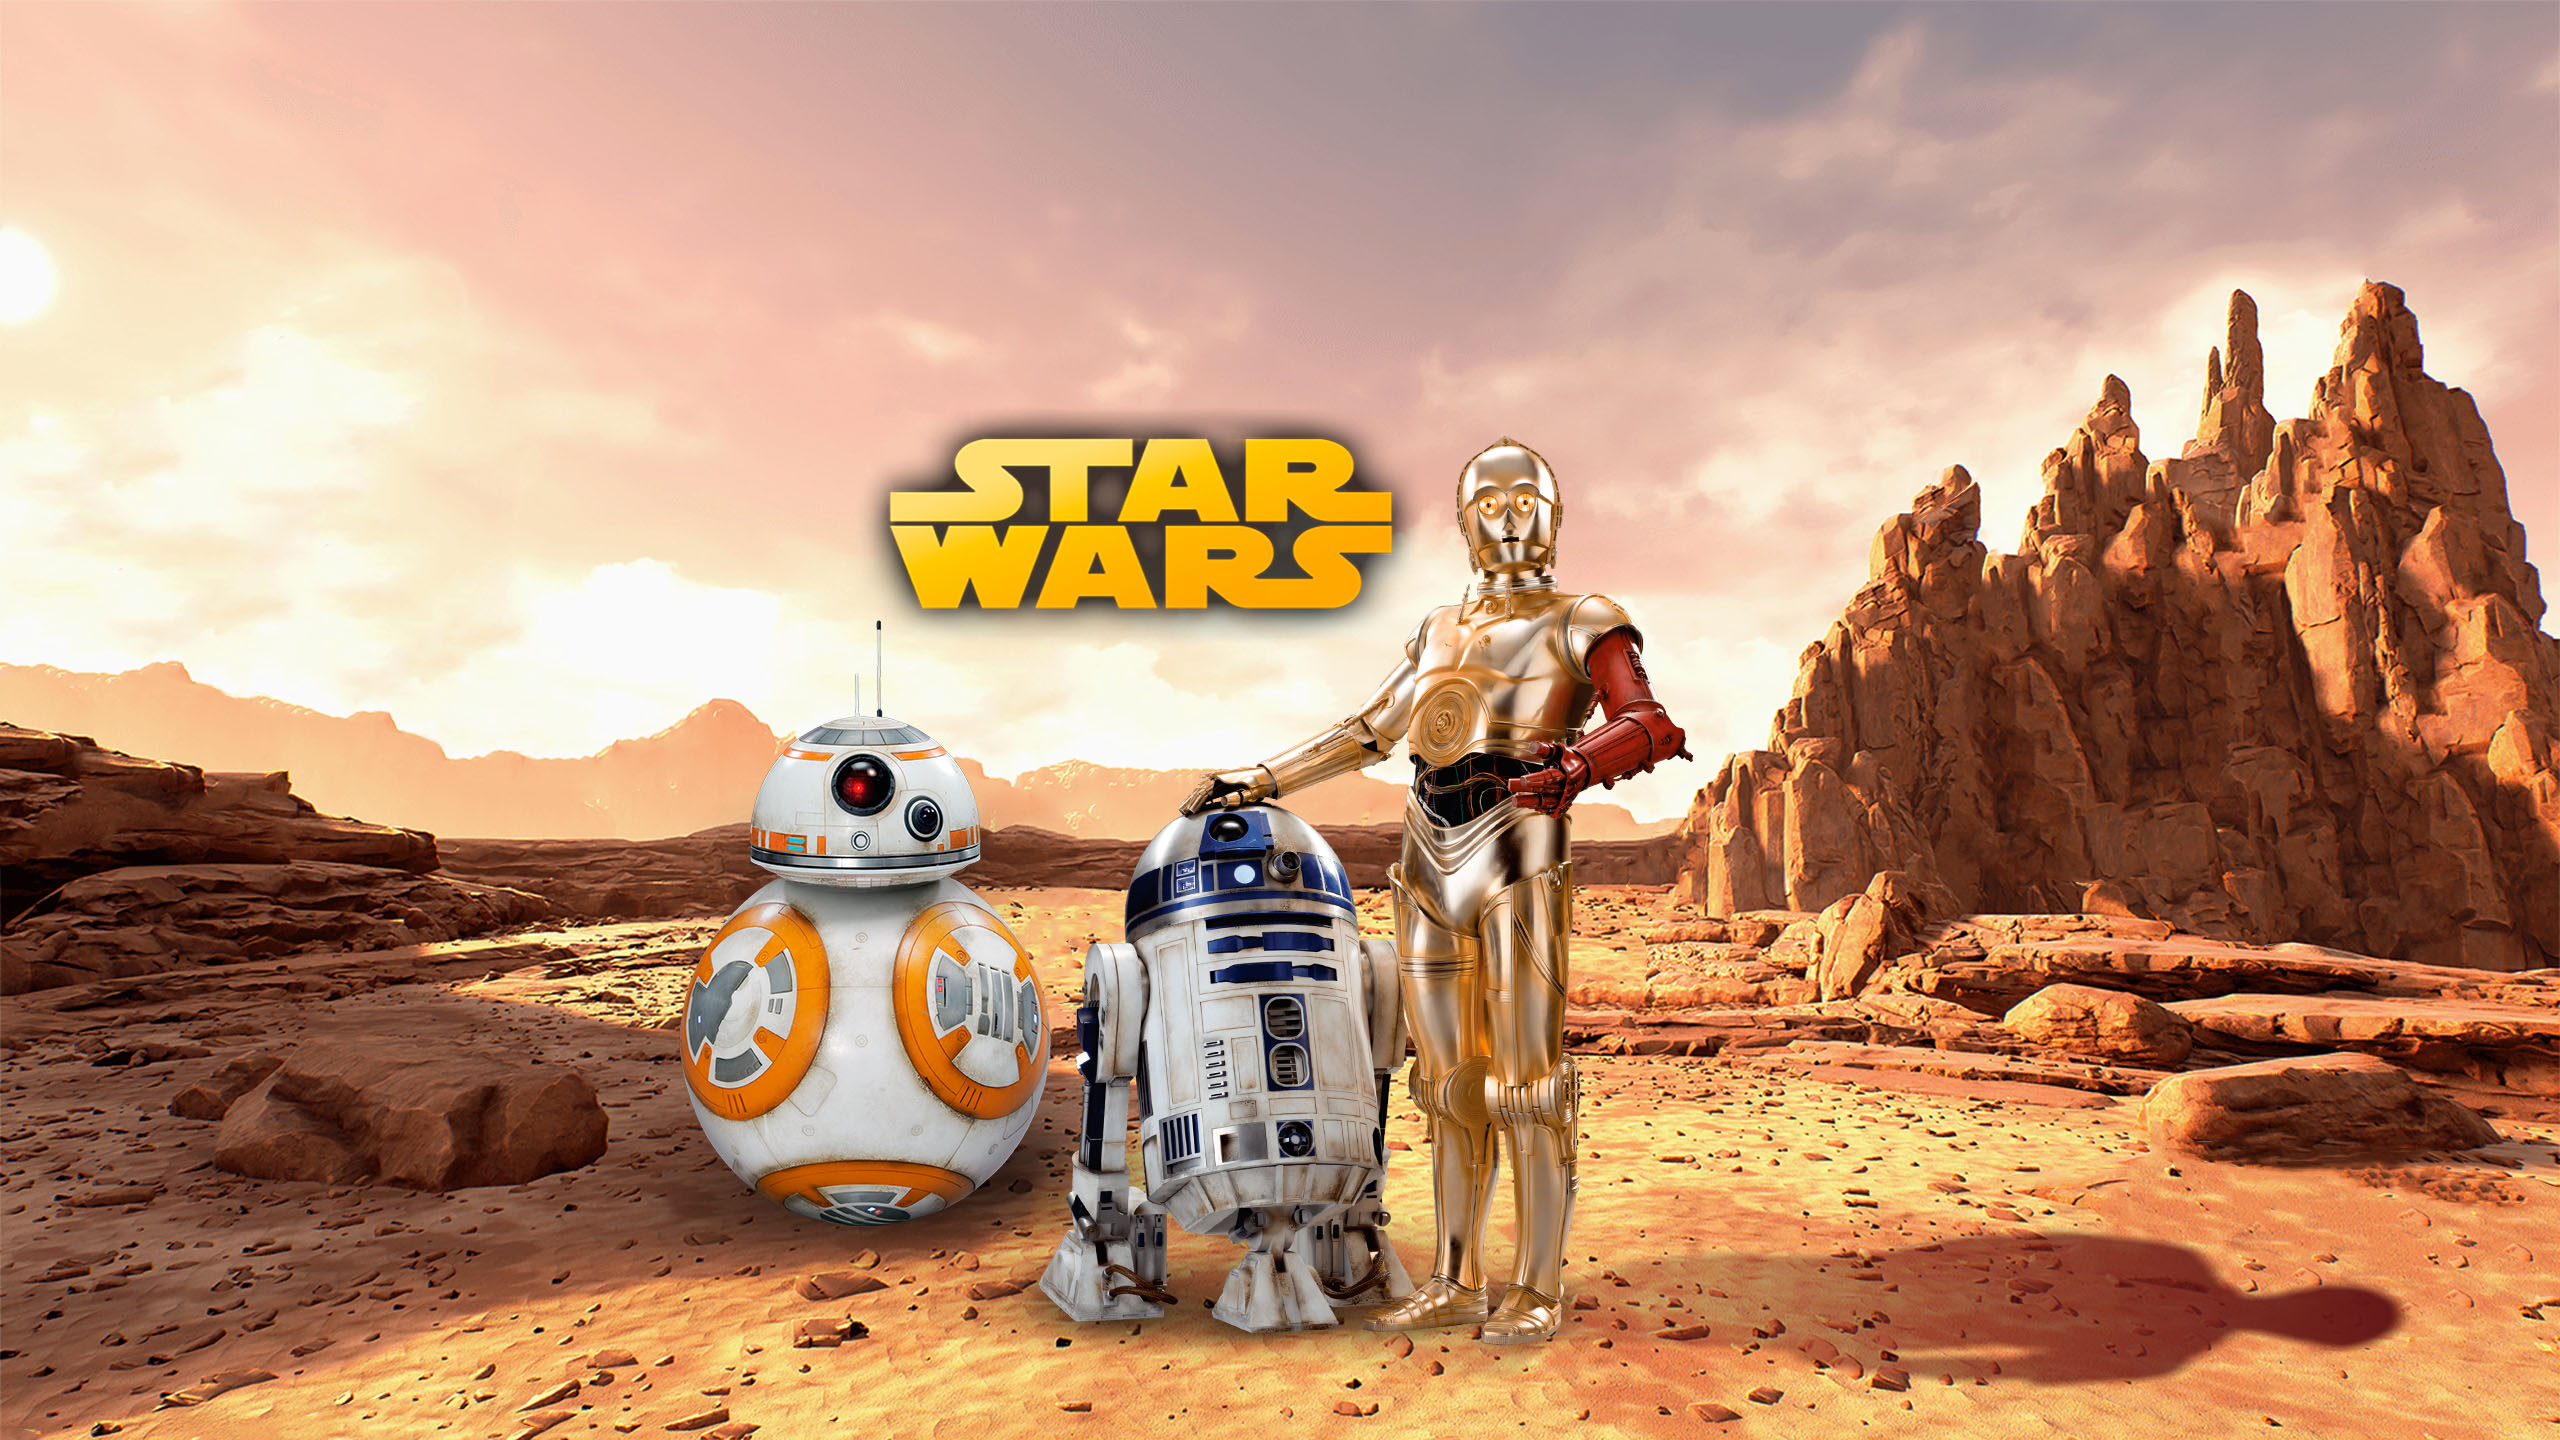 Star Wars Robots Images Wallpapers